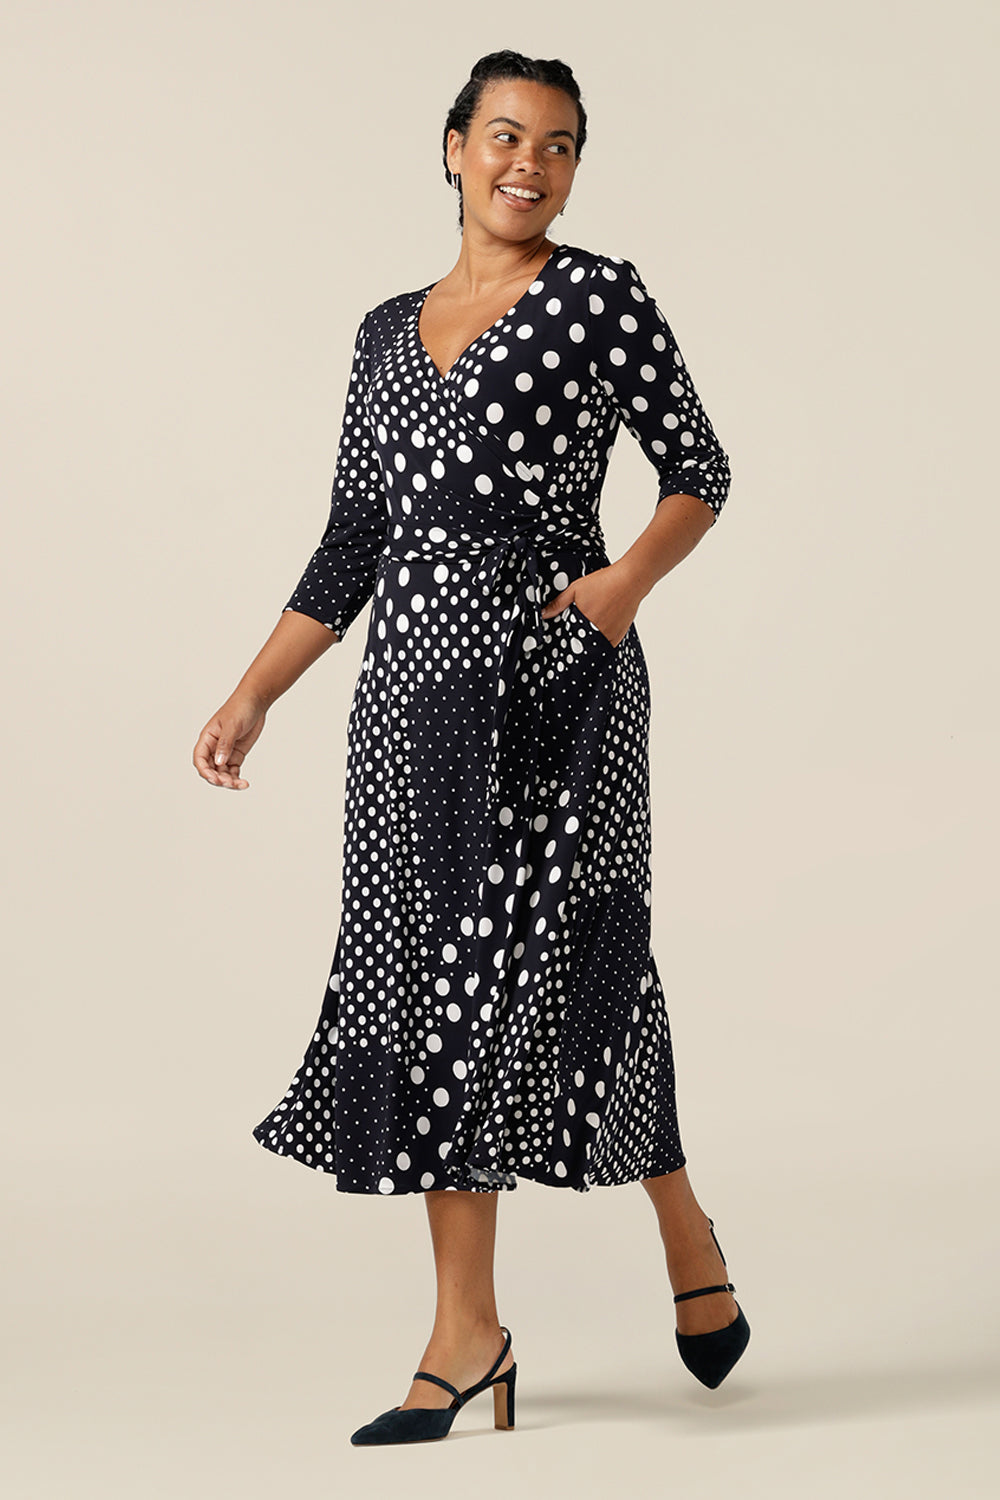 A jersey wrap dress with navy and white polka dot print, this is a great crossover workwear dress. Featuring 3/4 sleeves and a full, midi length skirt, this wrap dress was made in Australia by Australian and New Zealand women's fashion brand L&F.